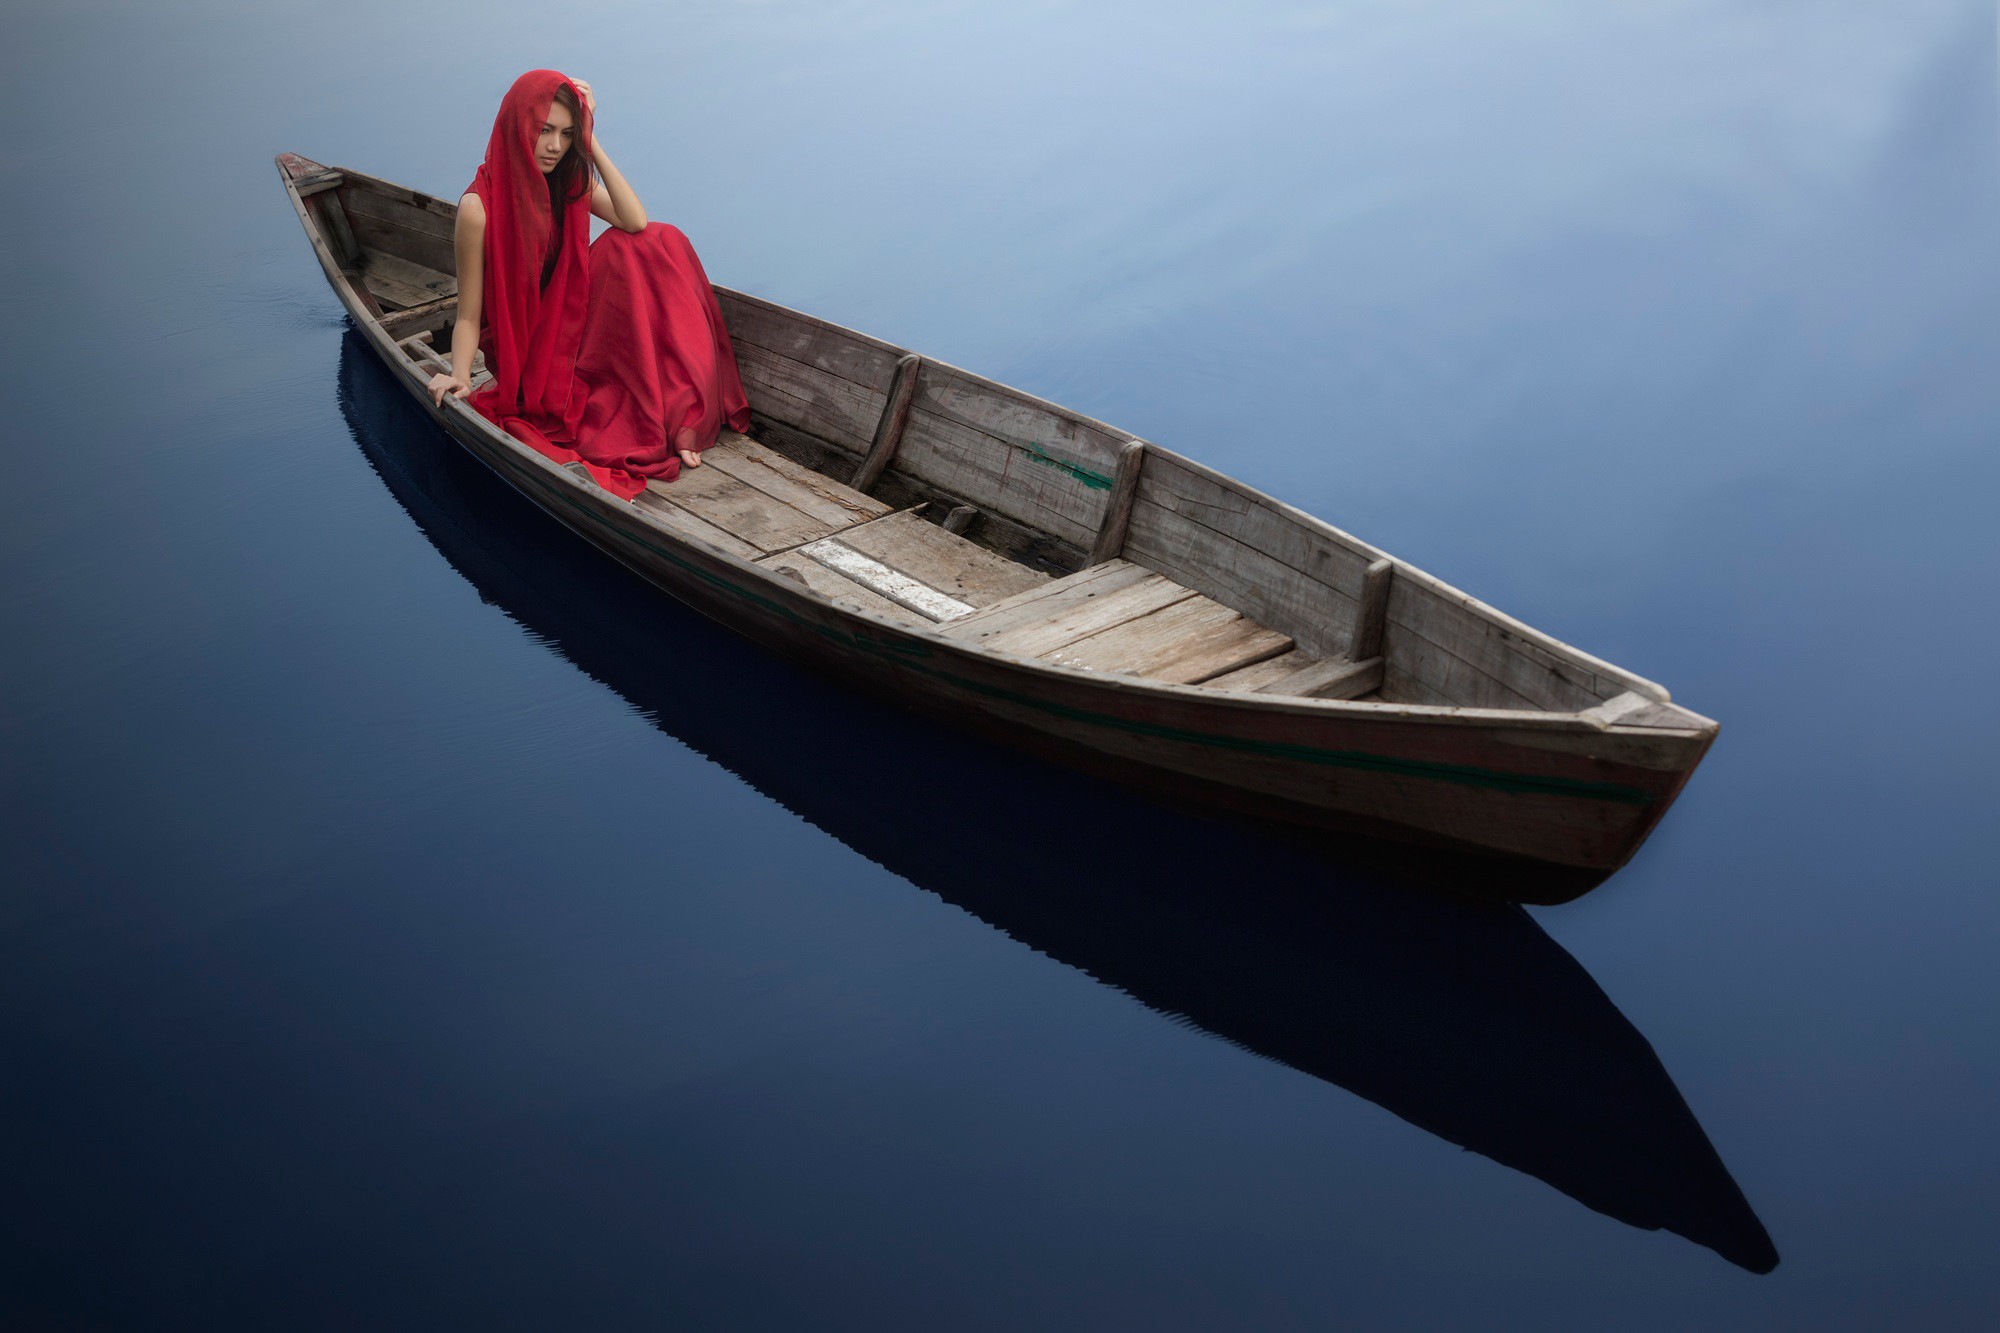 People 2000x1333 boat water women model brunette red dress barefoot women outdoors vehicle red clothing sitting women with boats